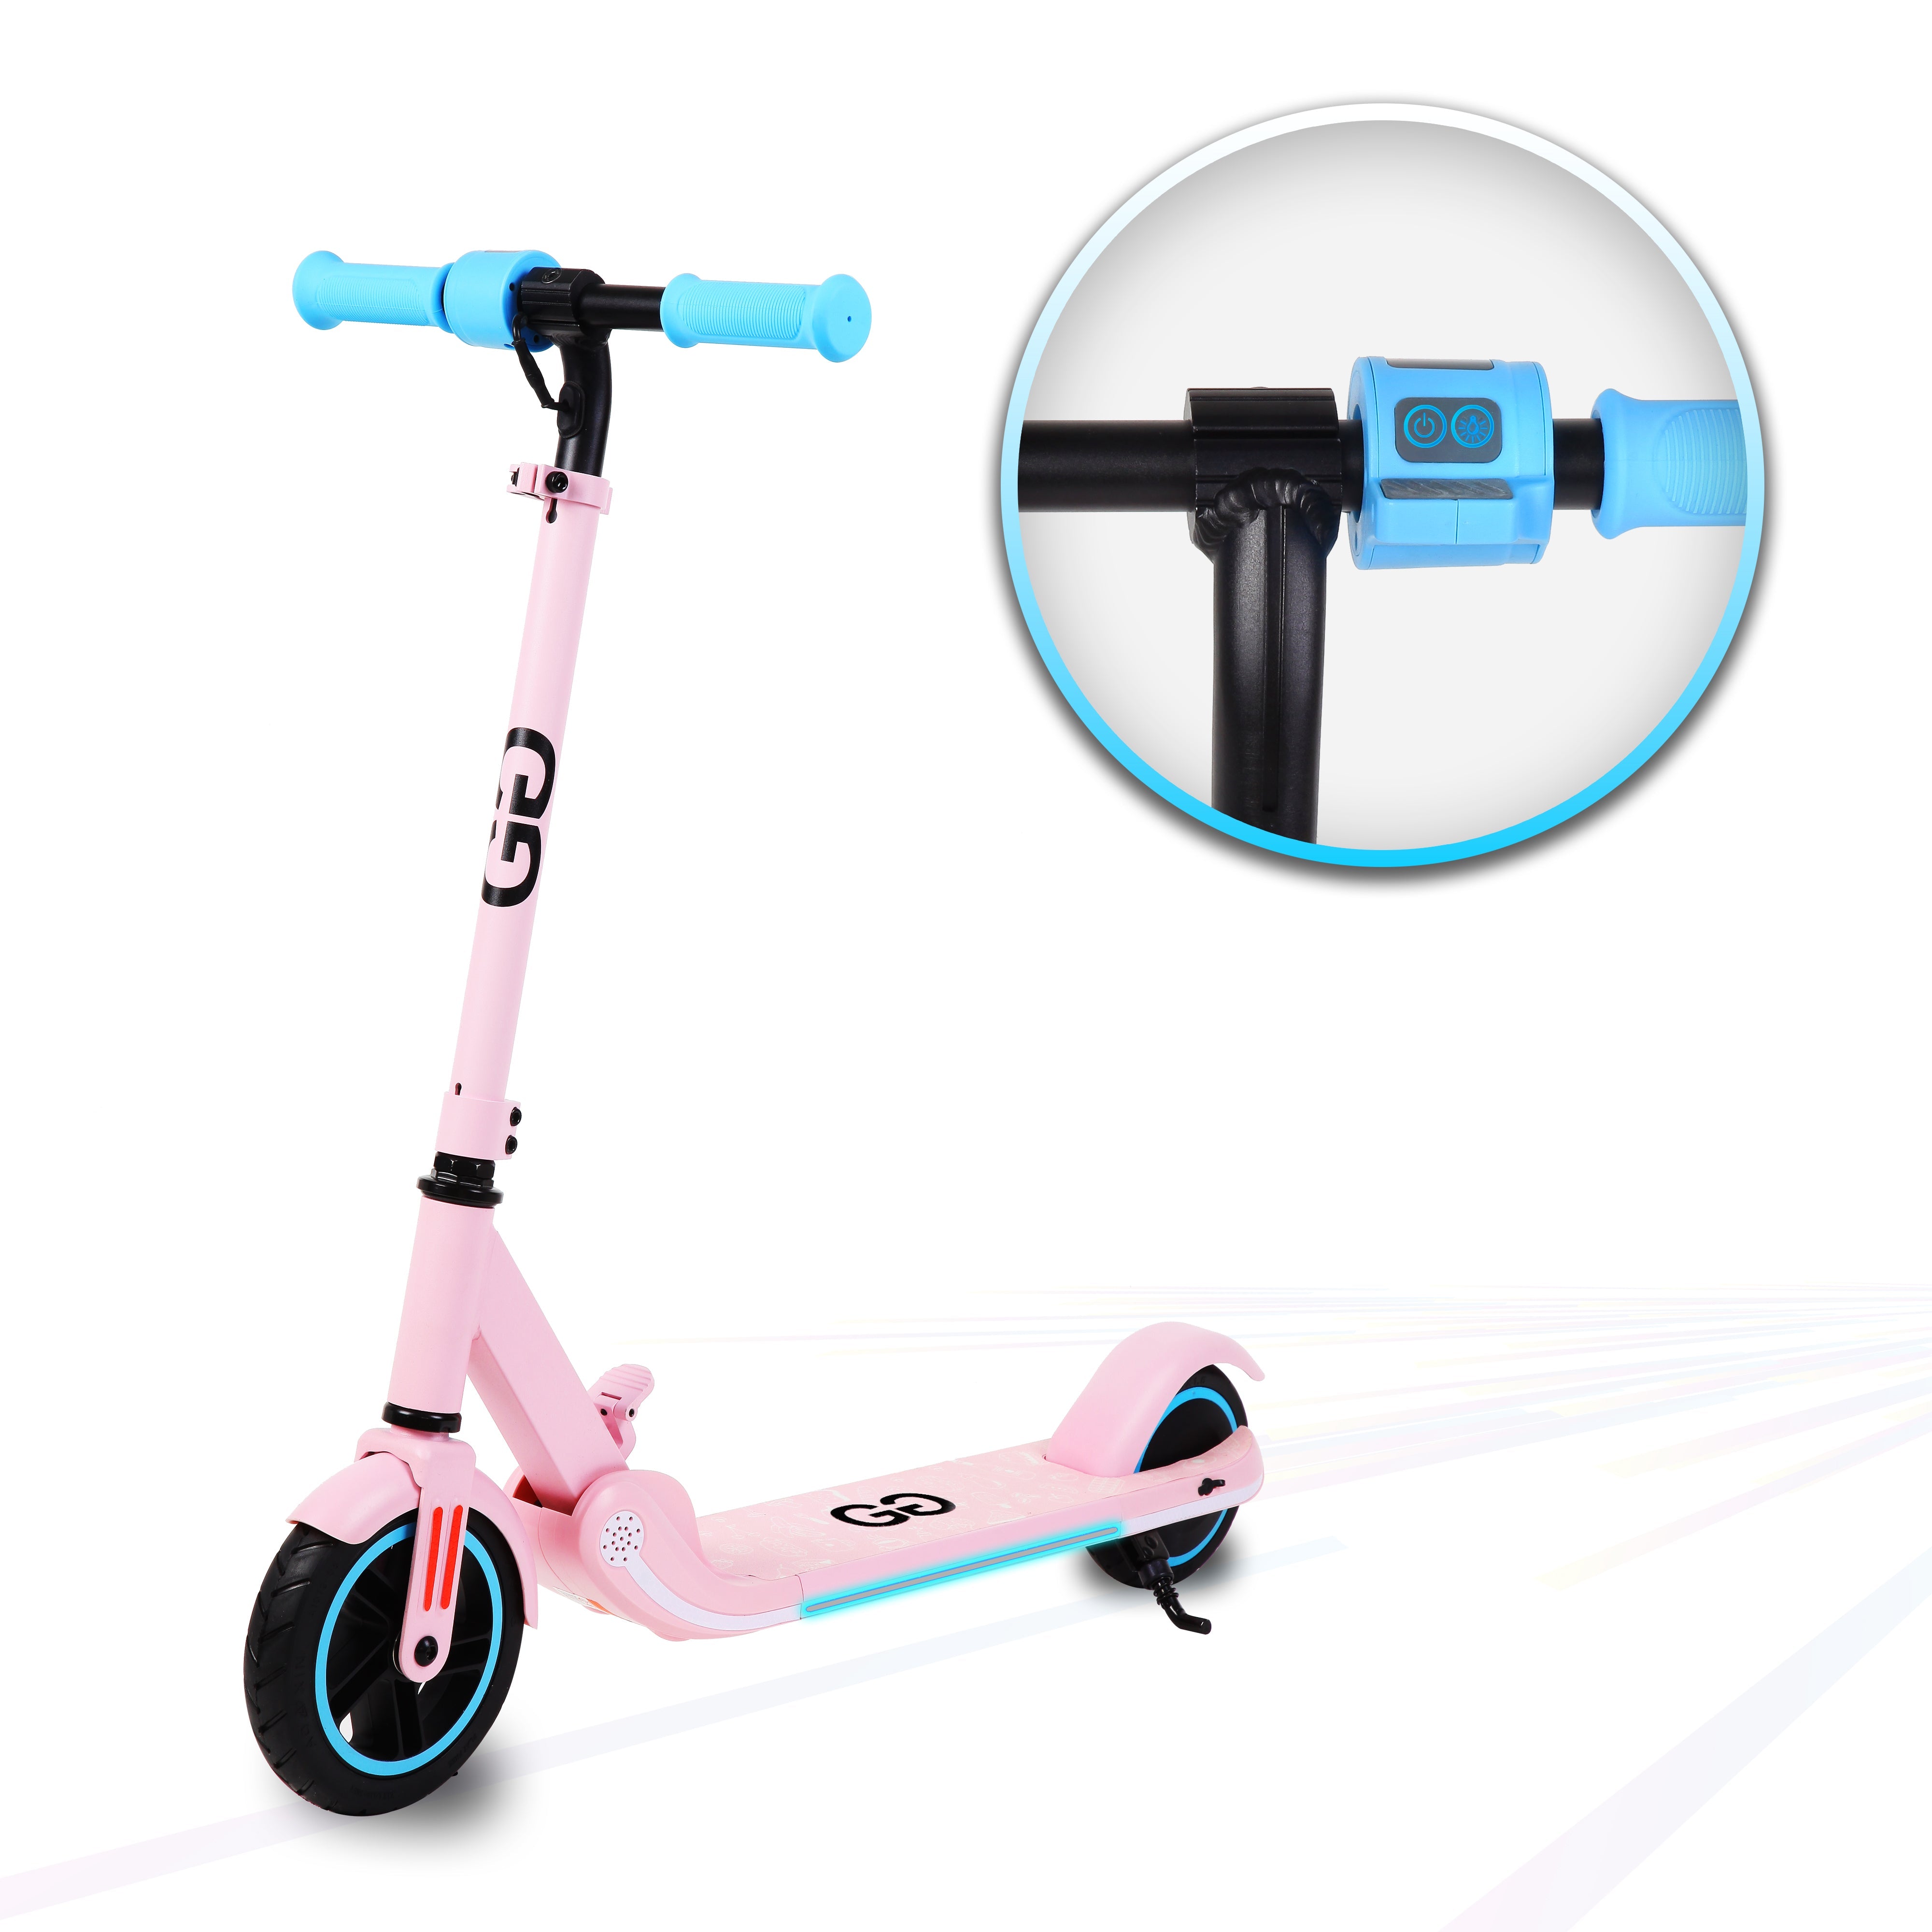 Vibrant Pink X1 Kids Electric Scooter at Hoverboard Store